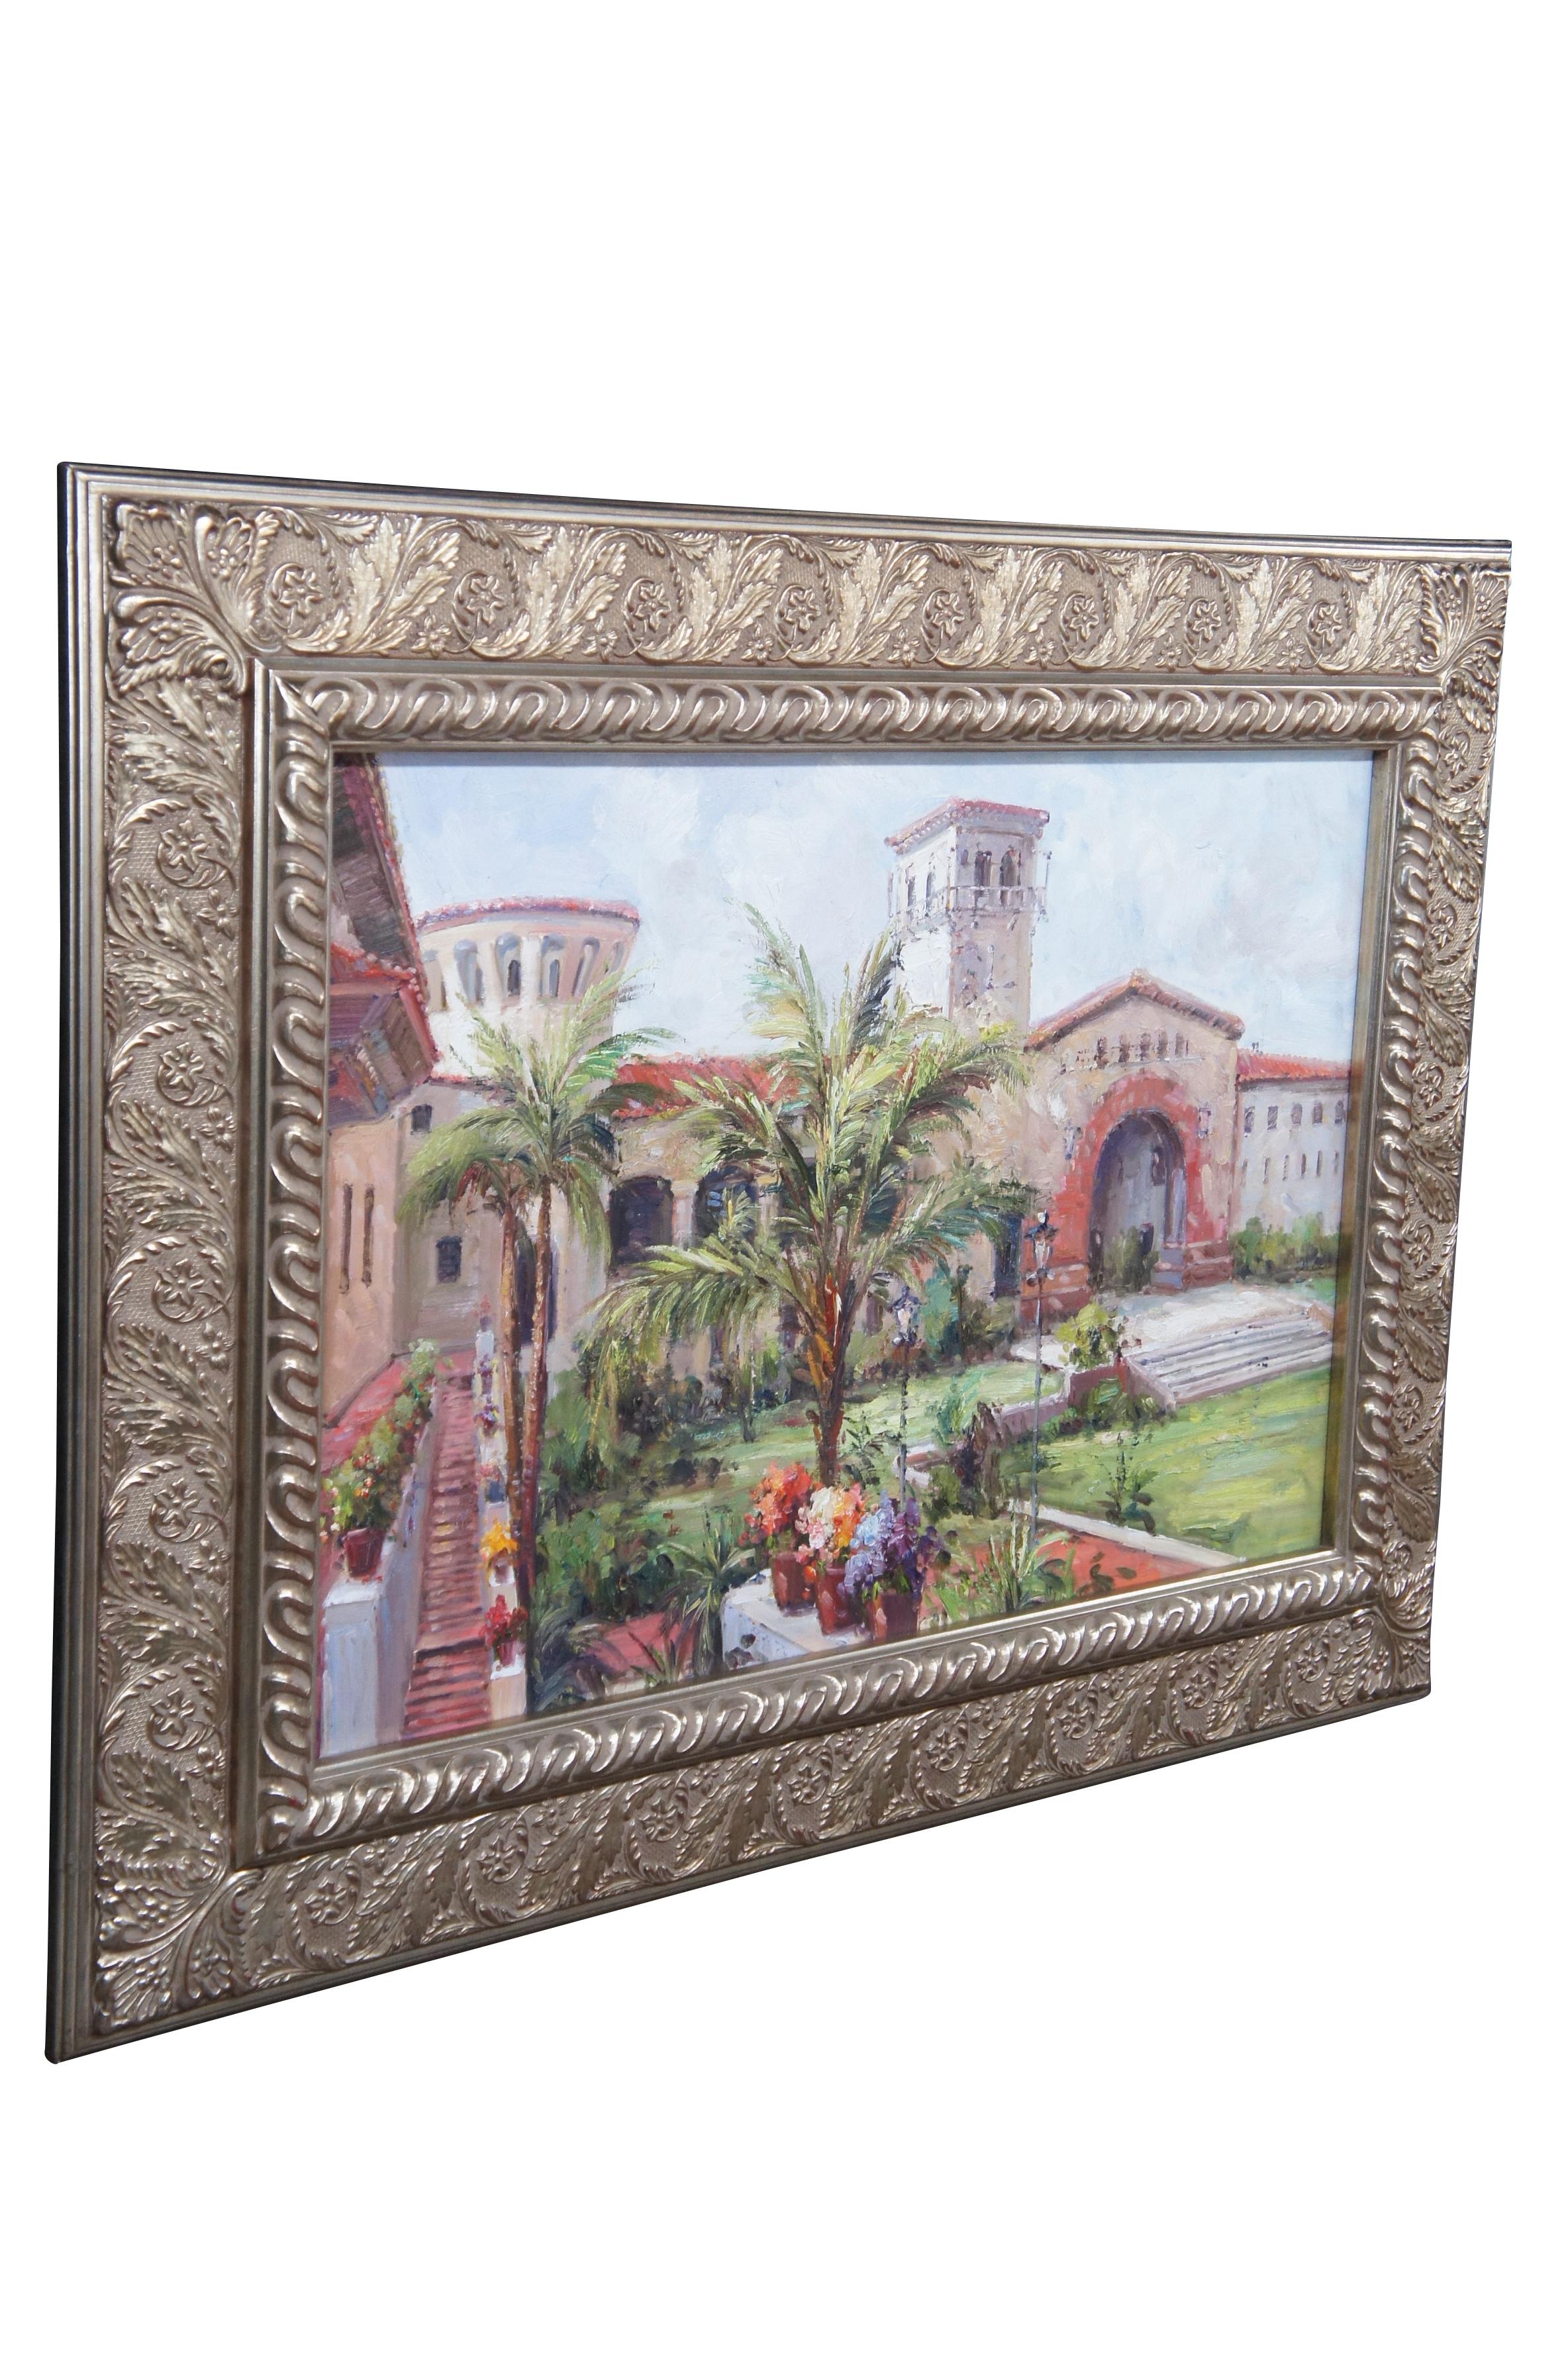 A Beautiful vintage Tuscan landscape oil painting on canvas featuring a Villa Estate view of the courtyard garden with palm trees, flowers and beautiful architecture. Framed in ornate silver floral acanthus frame.

Vintage oil painting of the Sunken